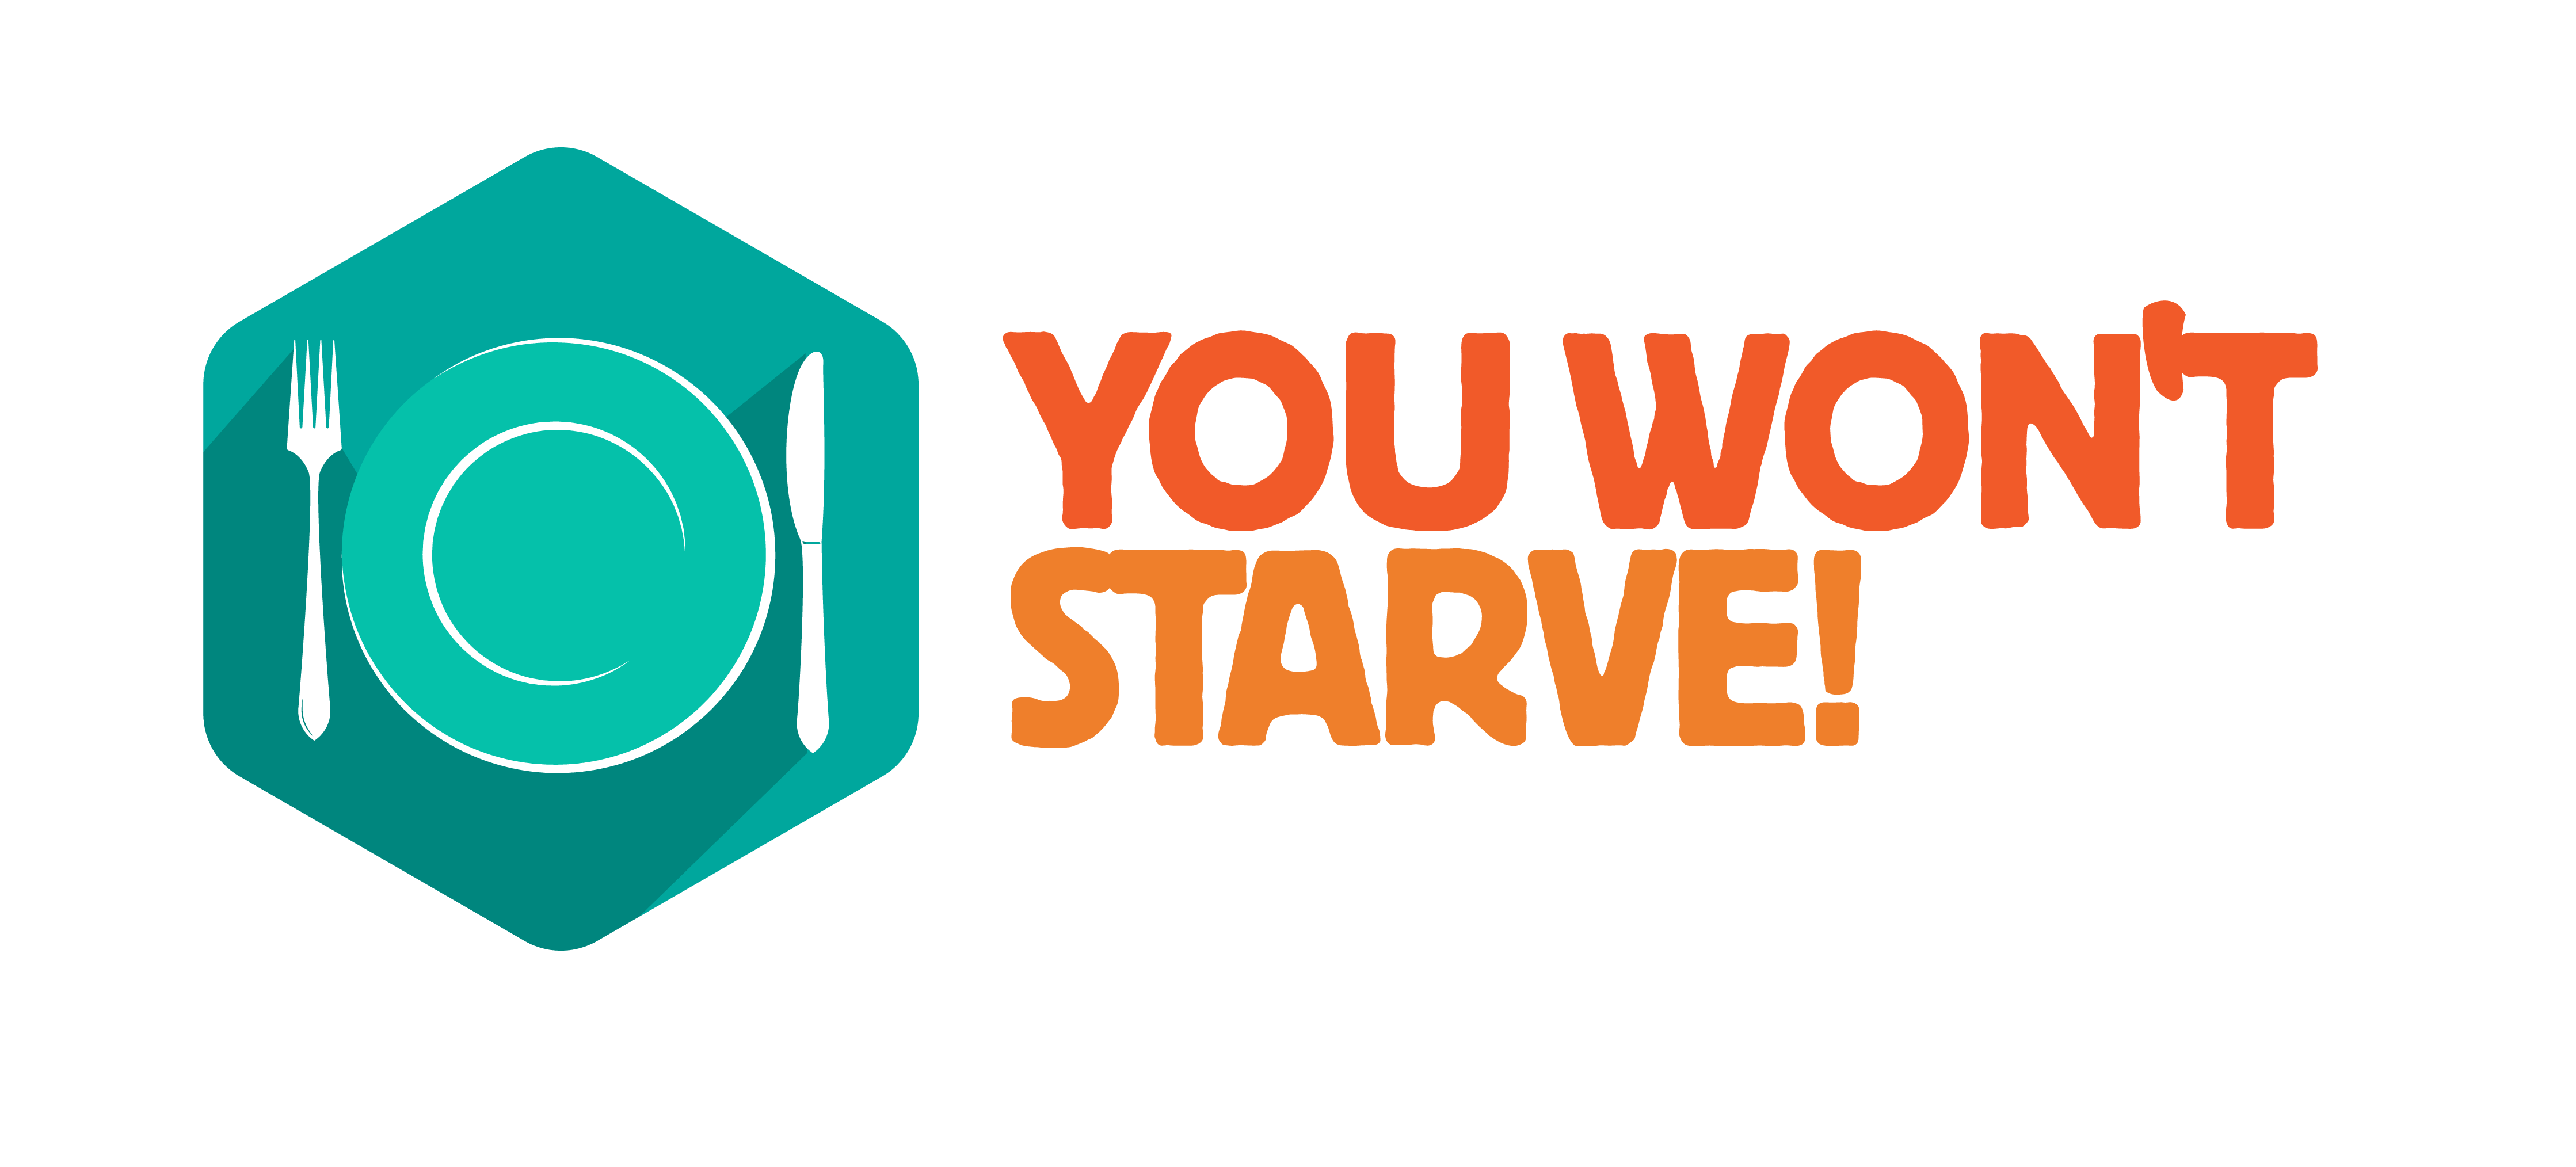 You Won't Starve